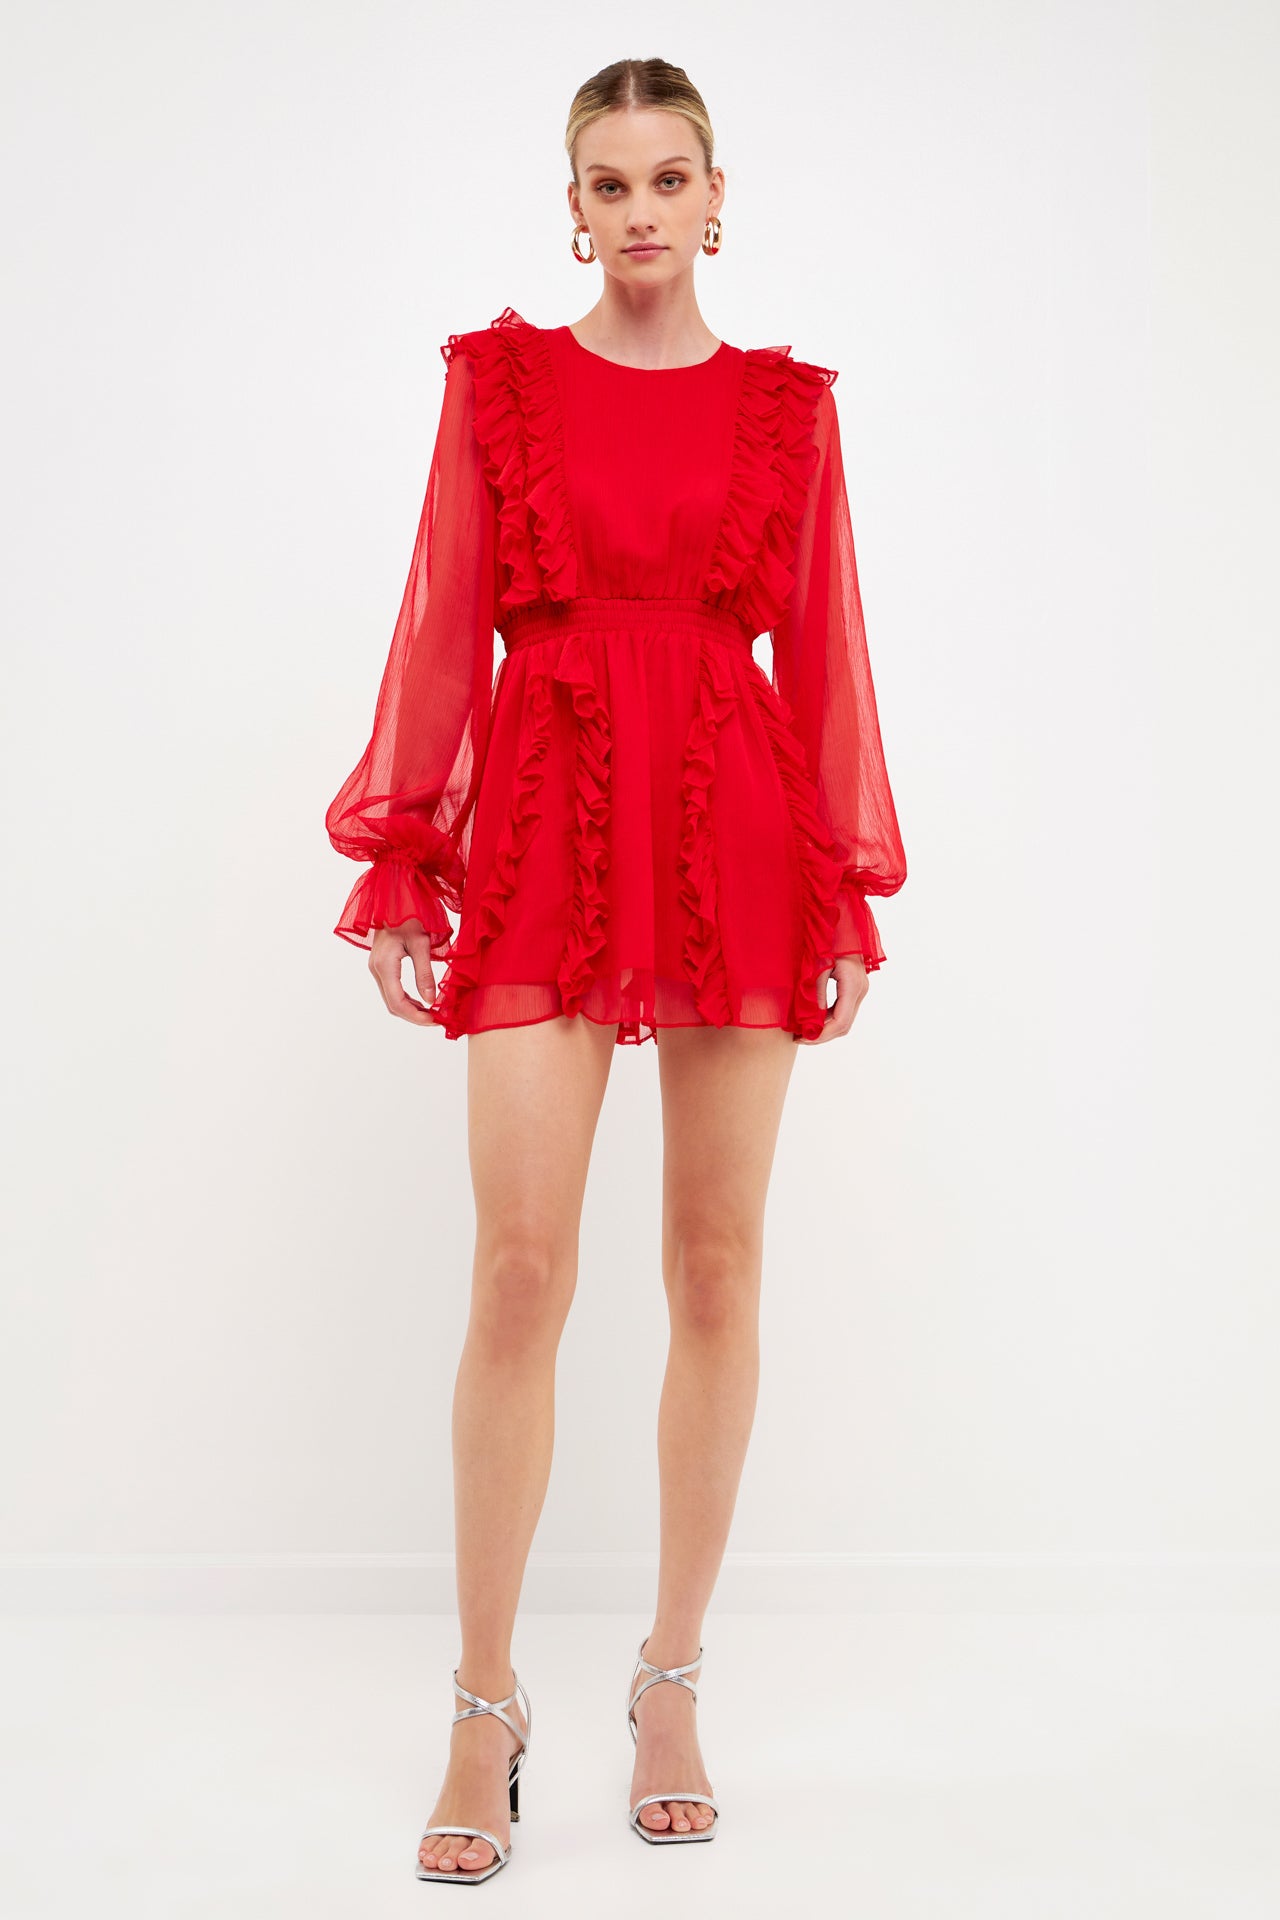 Endless Rose - Long Sleeve Ruffle Mini Dress - Dresses in Women's Clothing available at endlessrose.com